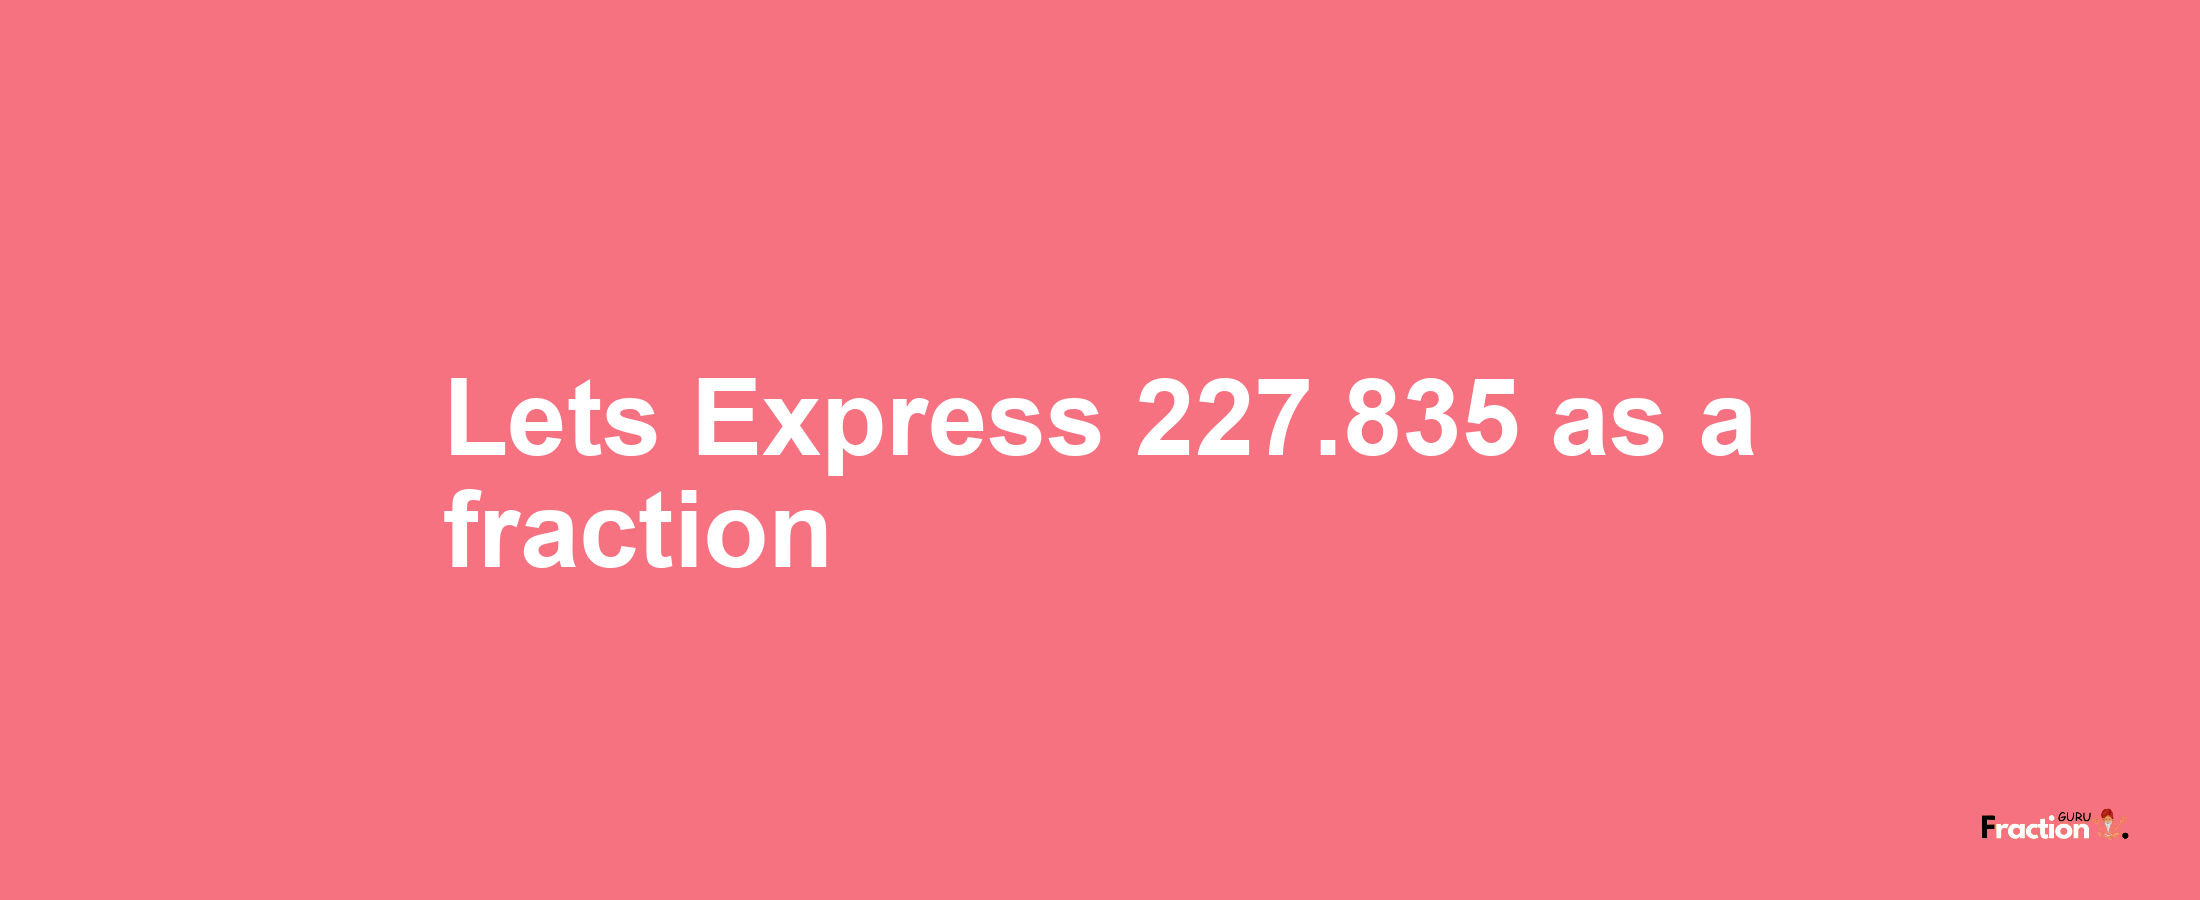 Lets Express 227.835 as afraction